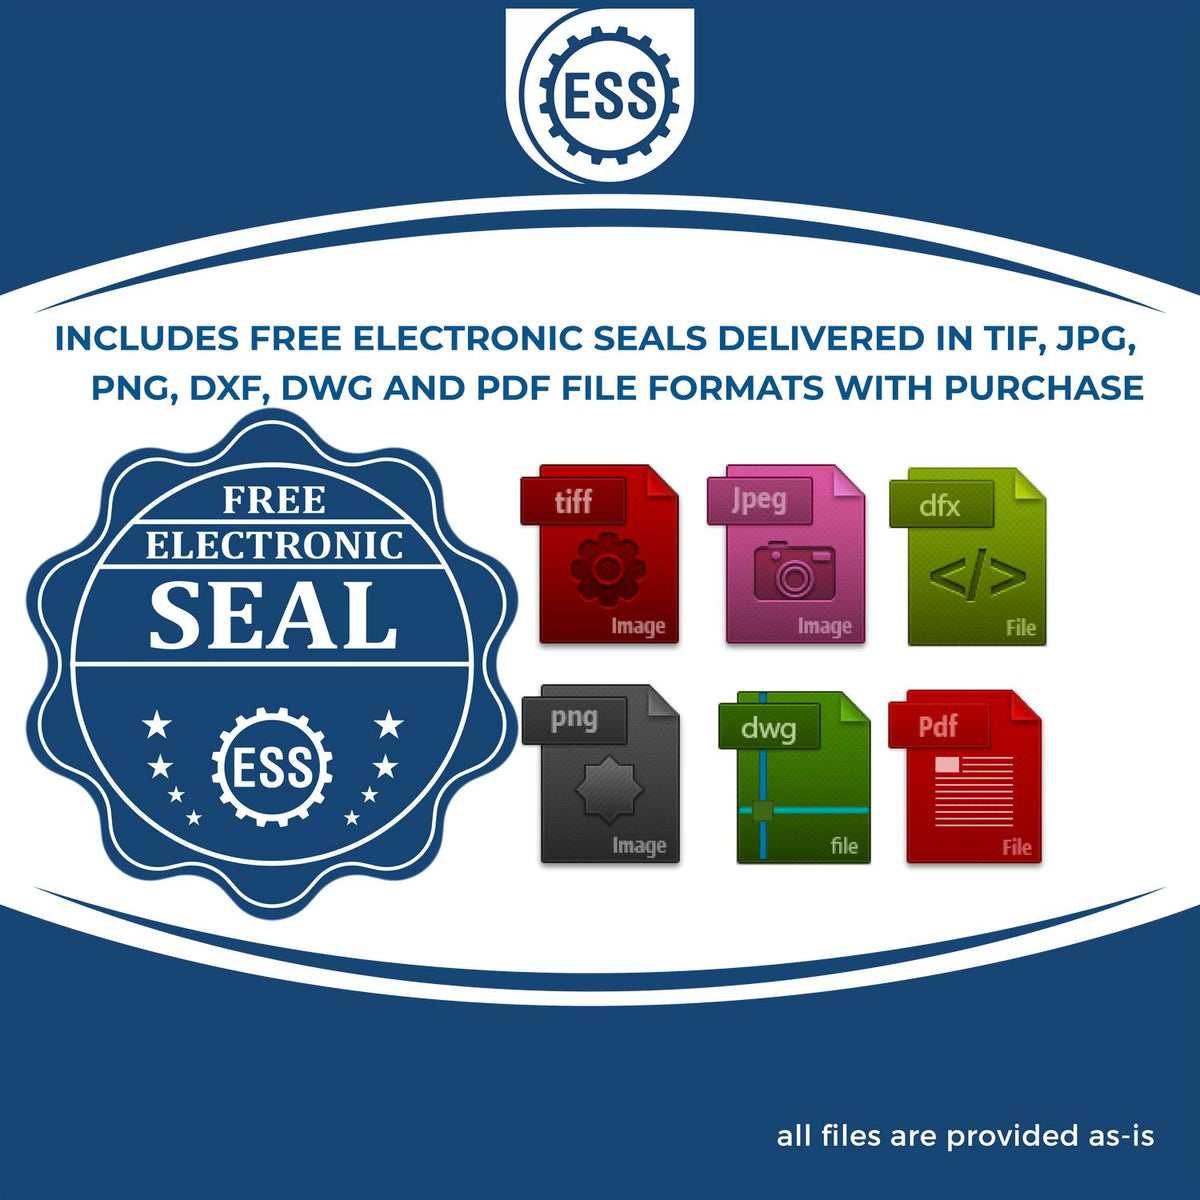 An infographic for the free electronic seal for the Wooden Handle North Carolina State Seal Notary Public Stamp illustrating the different file type icons such as DXF, DWG, TIF, JPG and PNG.